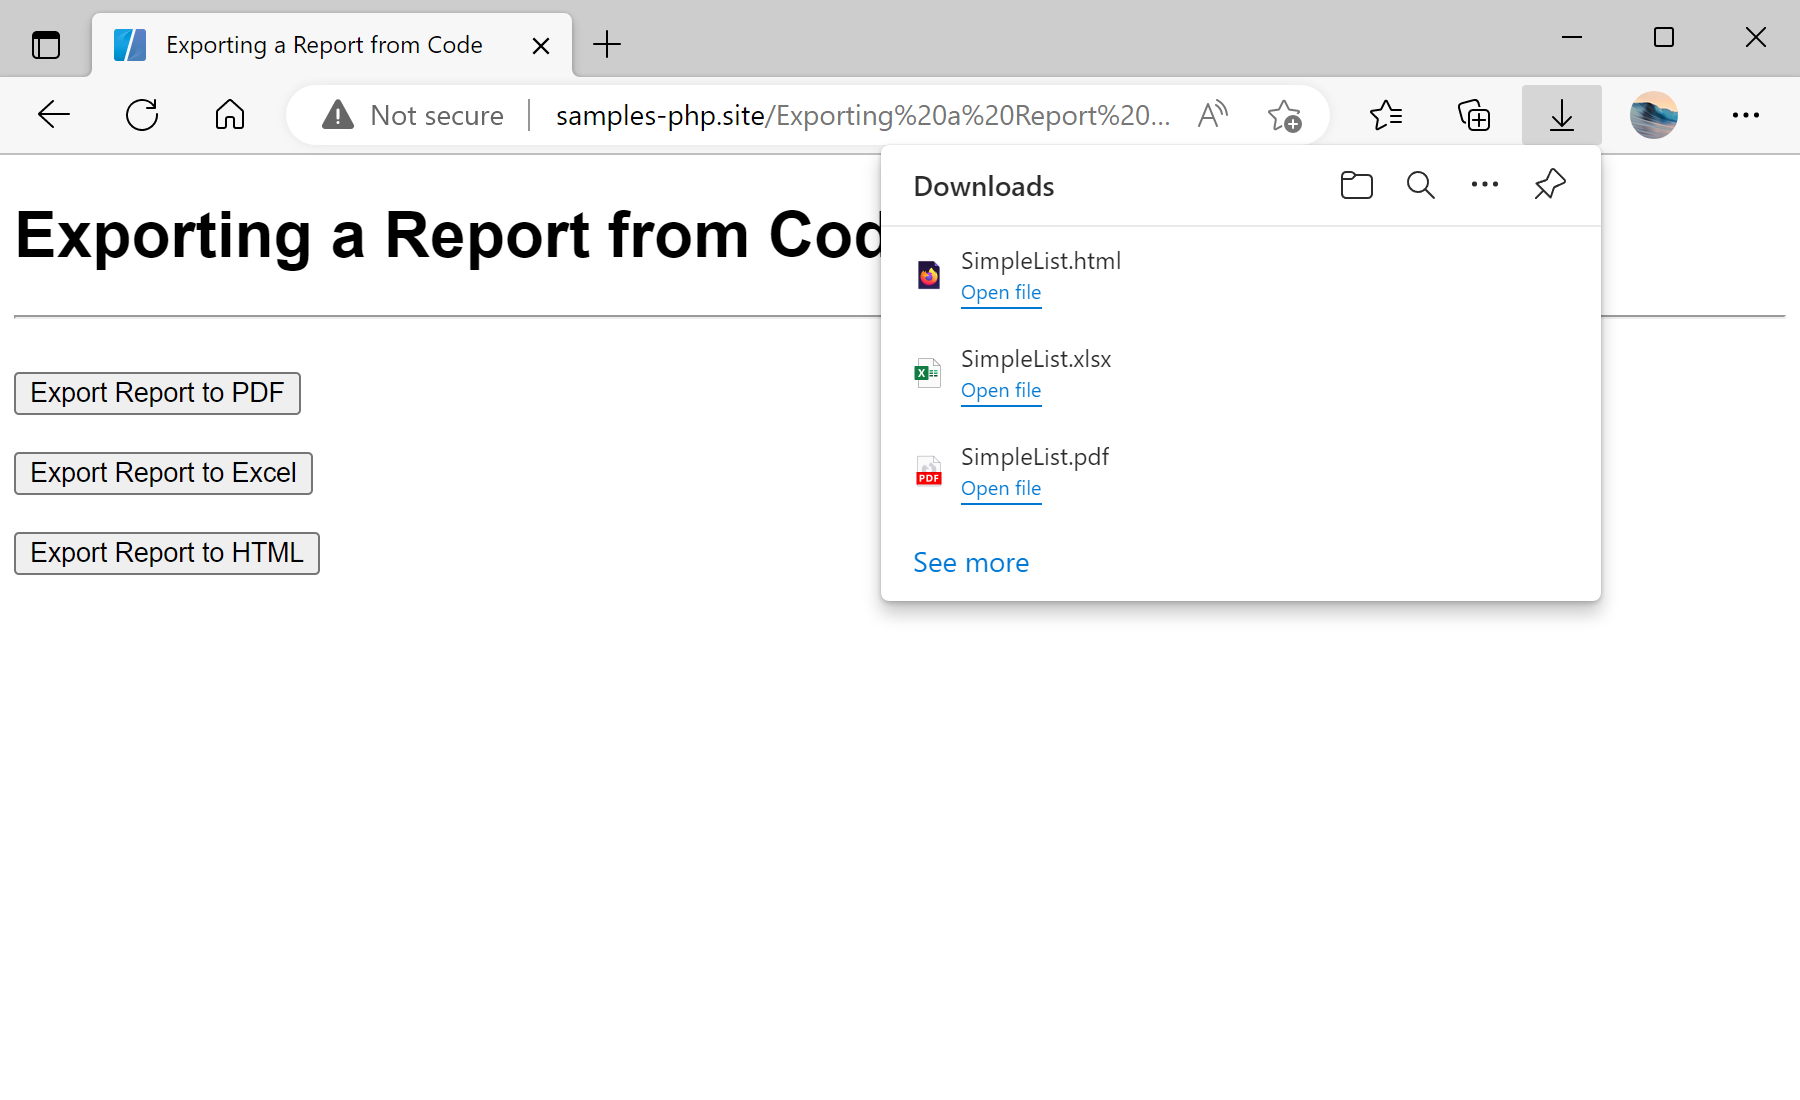 Exporting a Report from Code